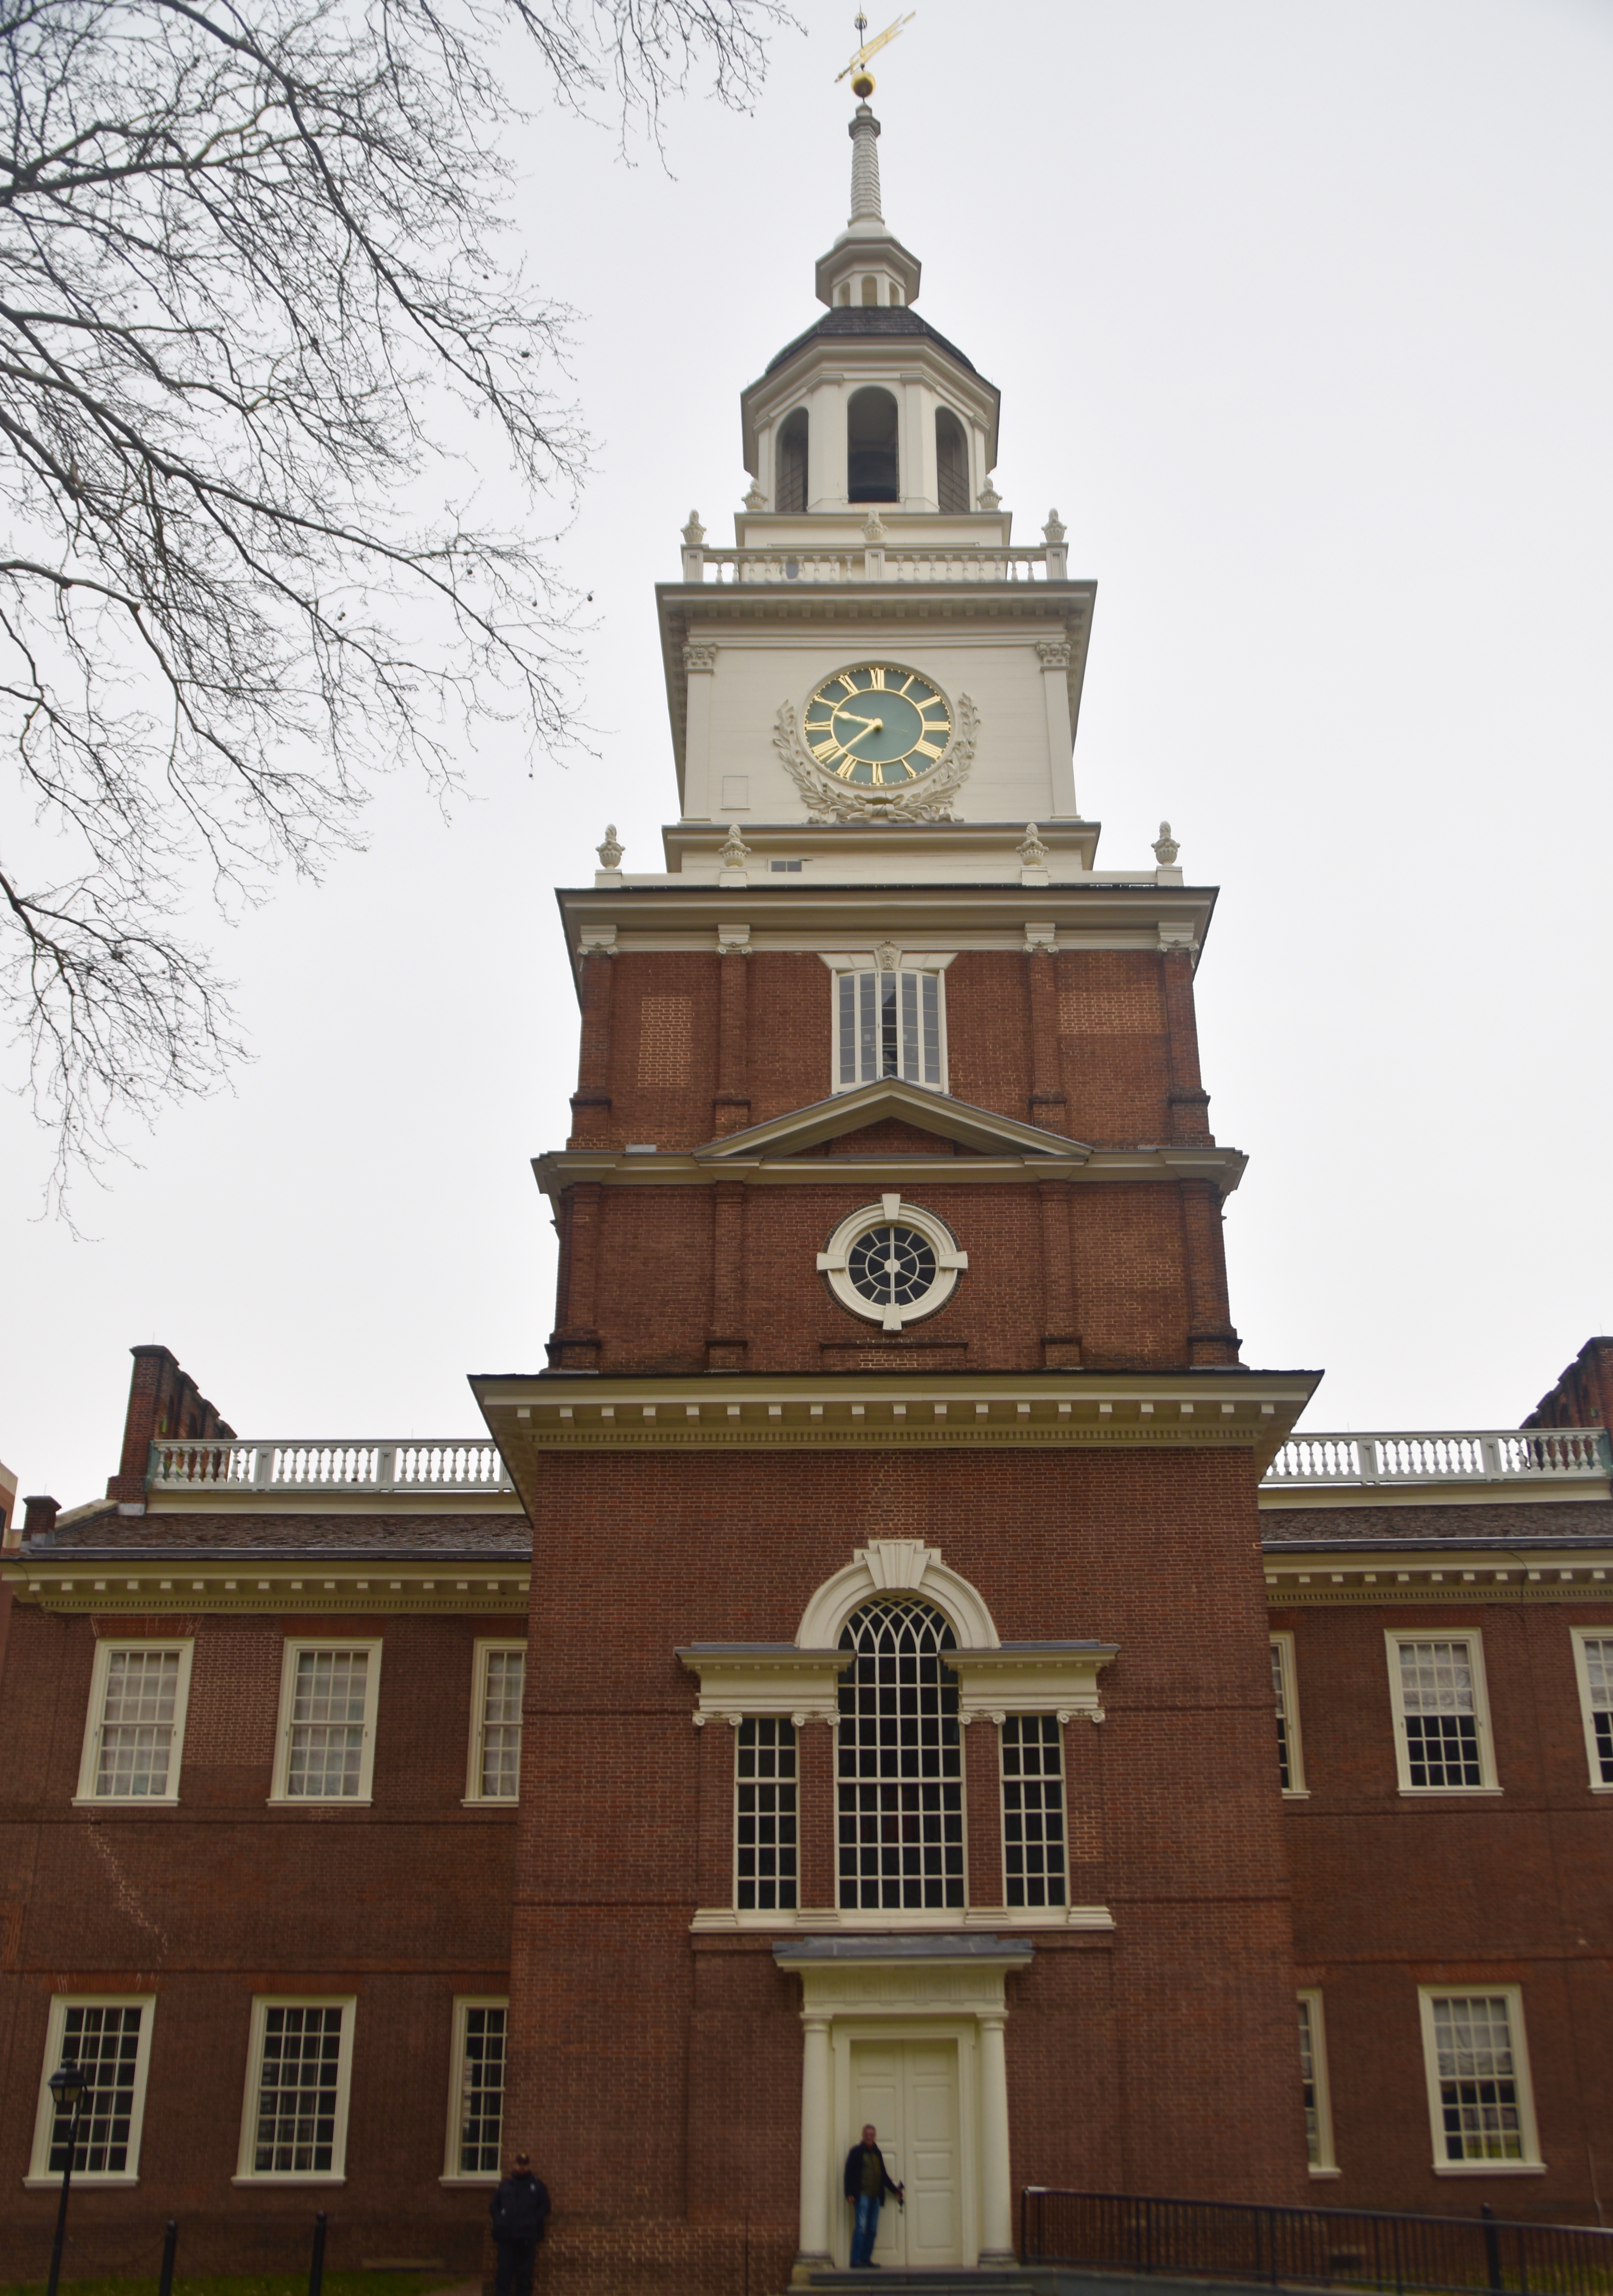 Entering Independence Hall